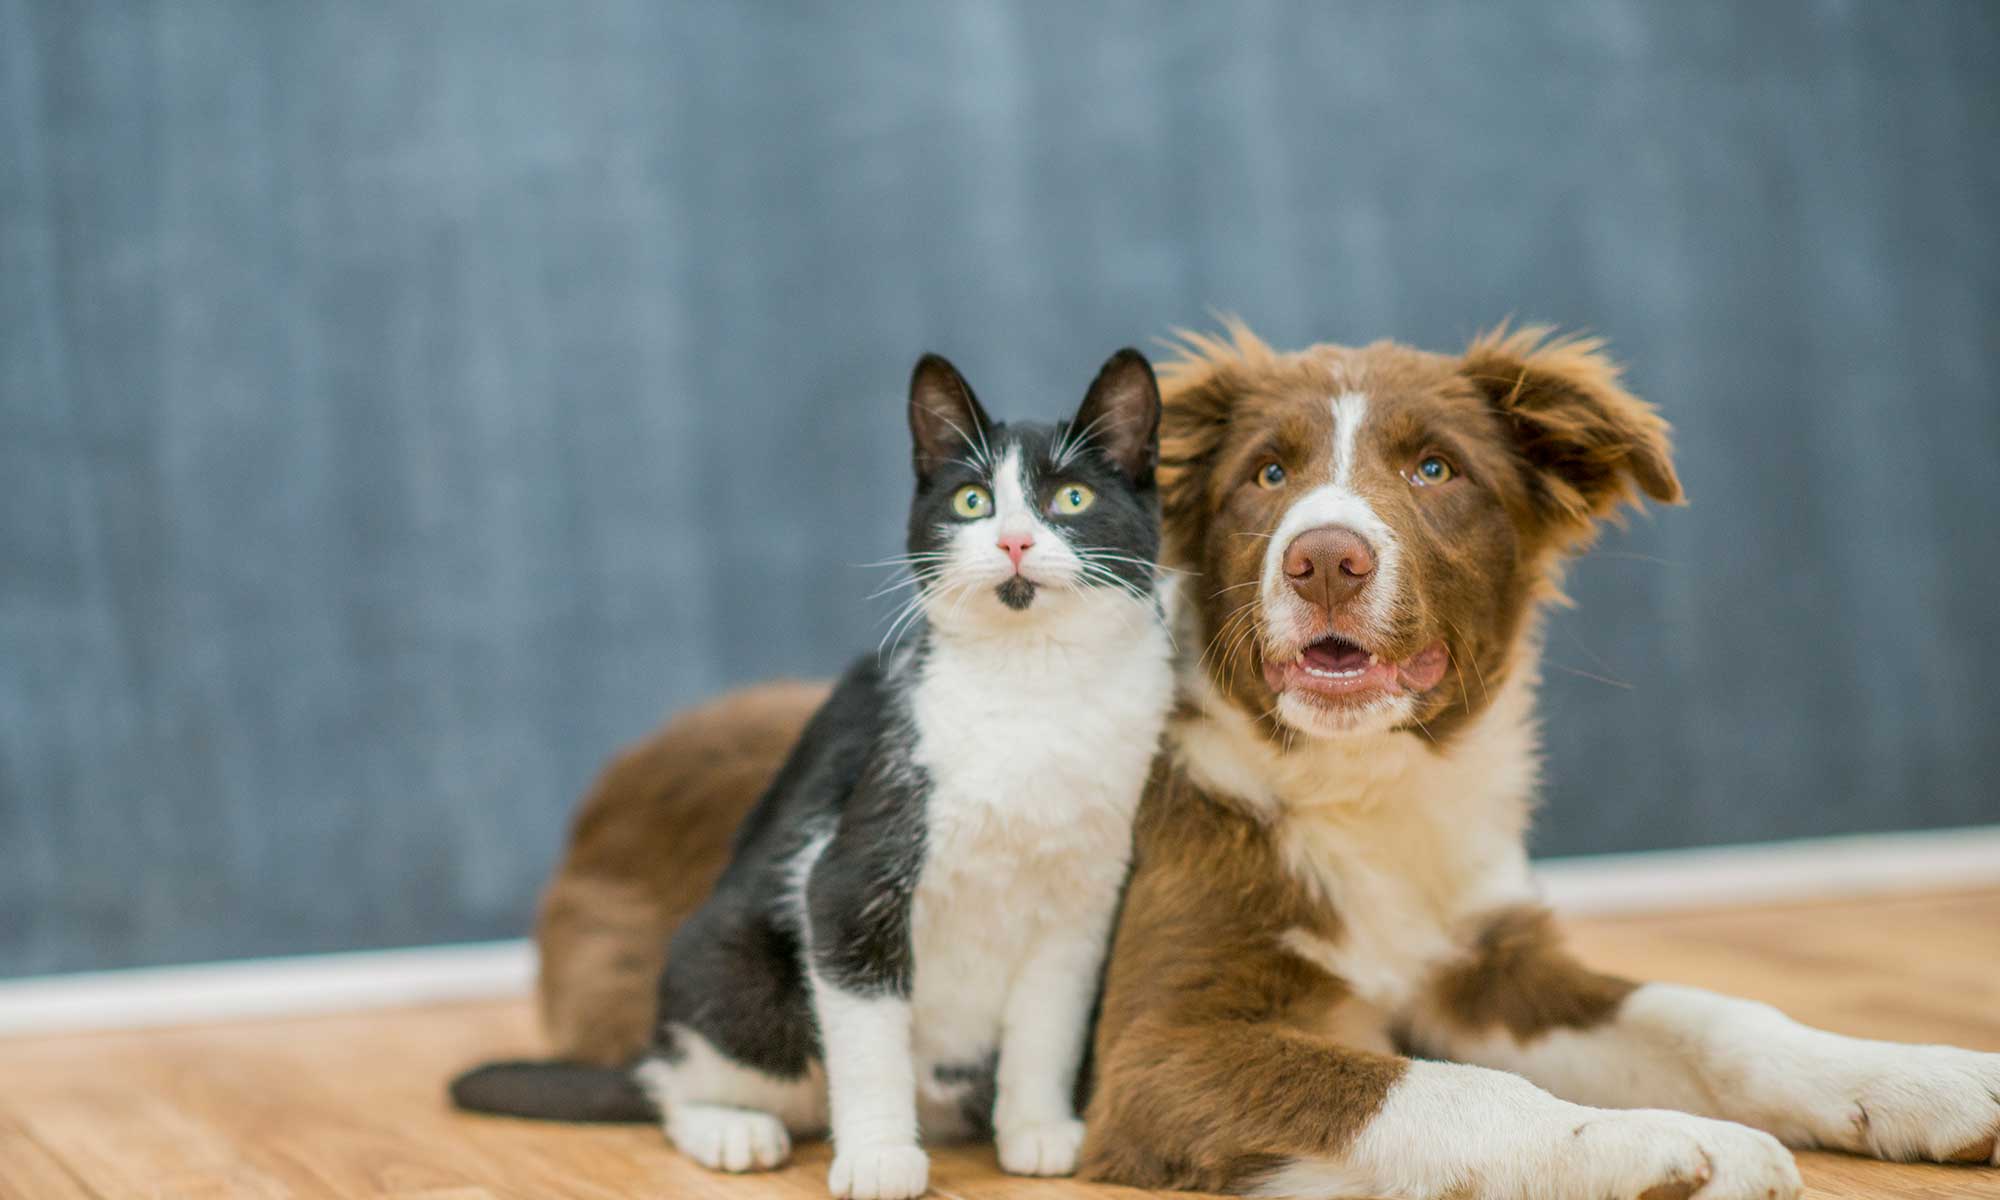 A dog and cat in front of a teal background